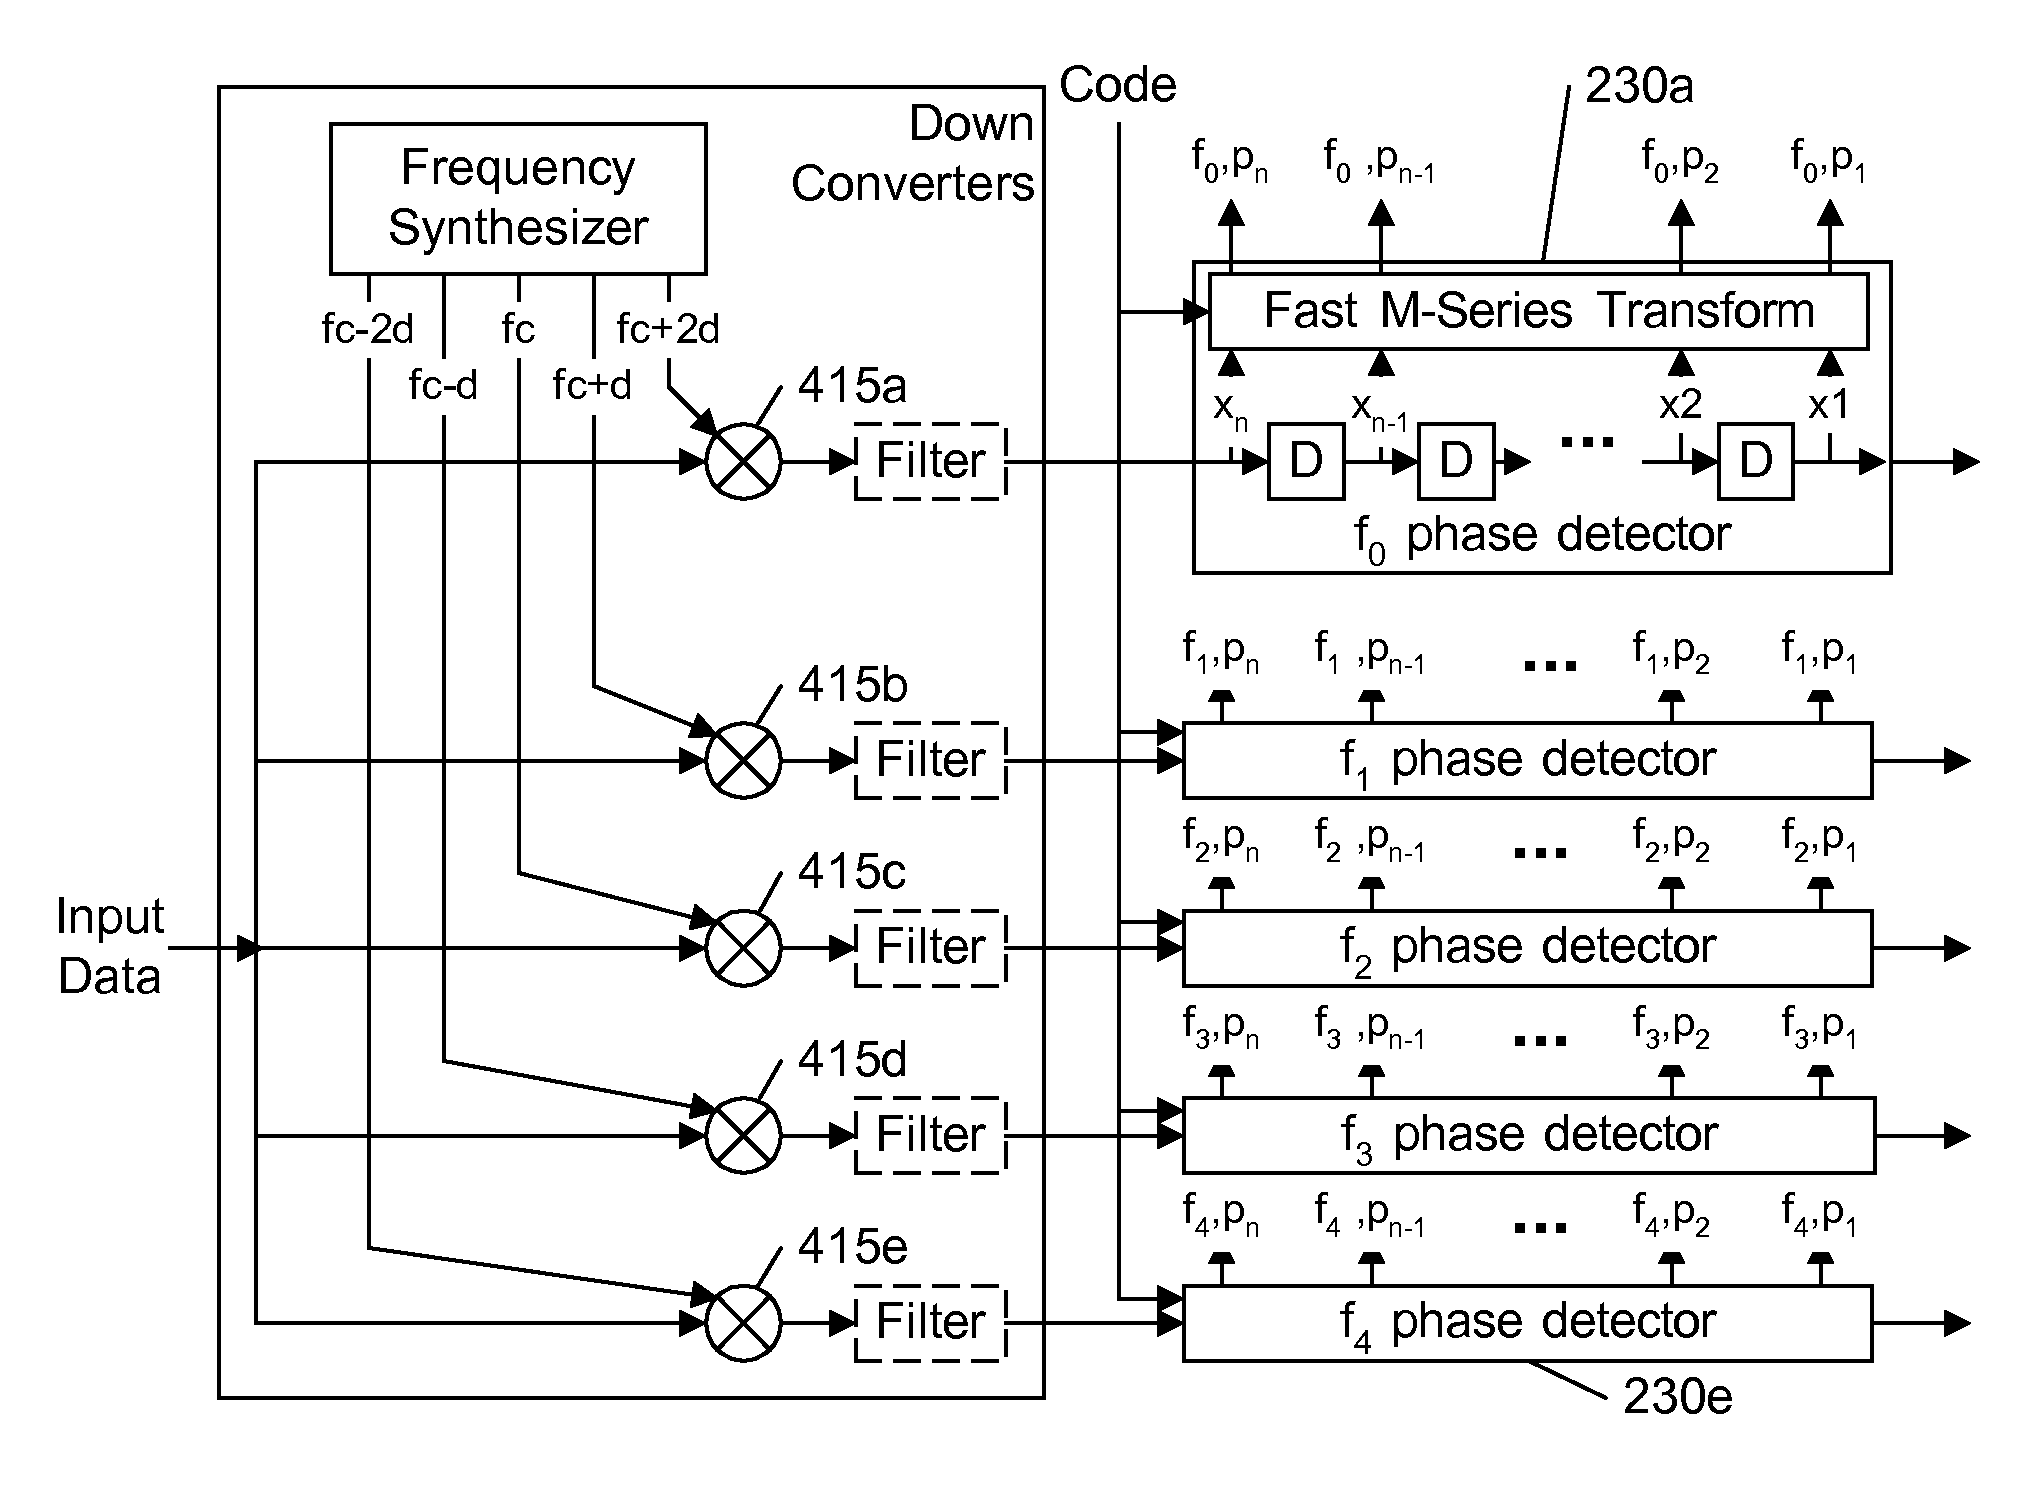 Spread-spectrum receiver with fast m-sequence transform